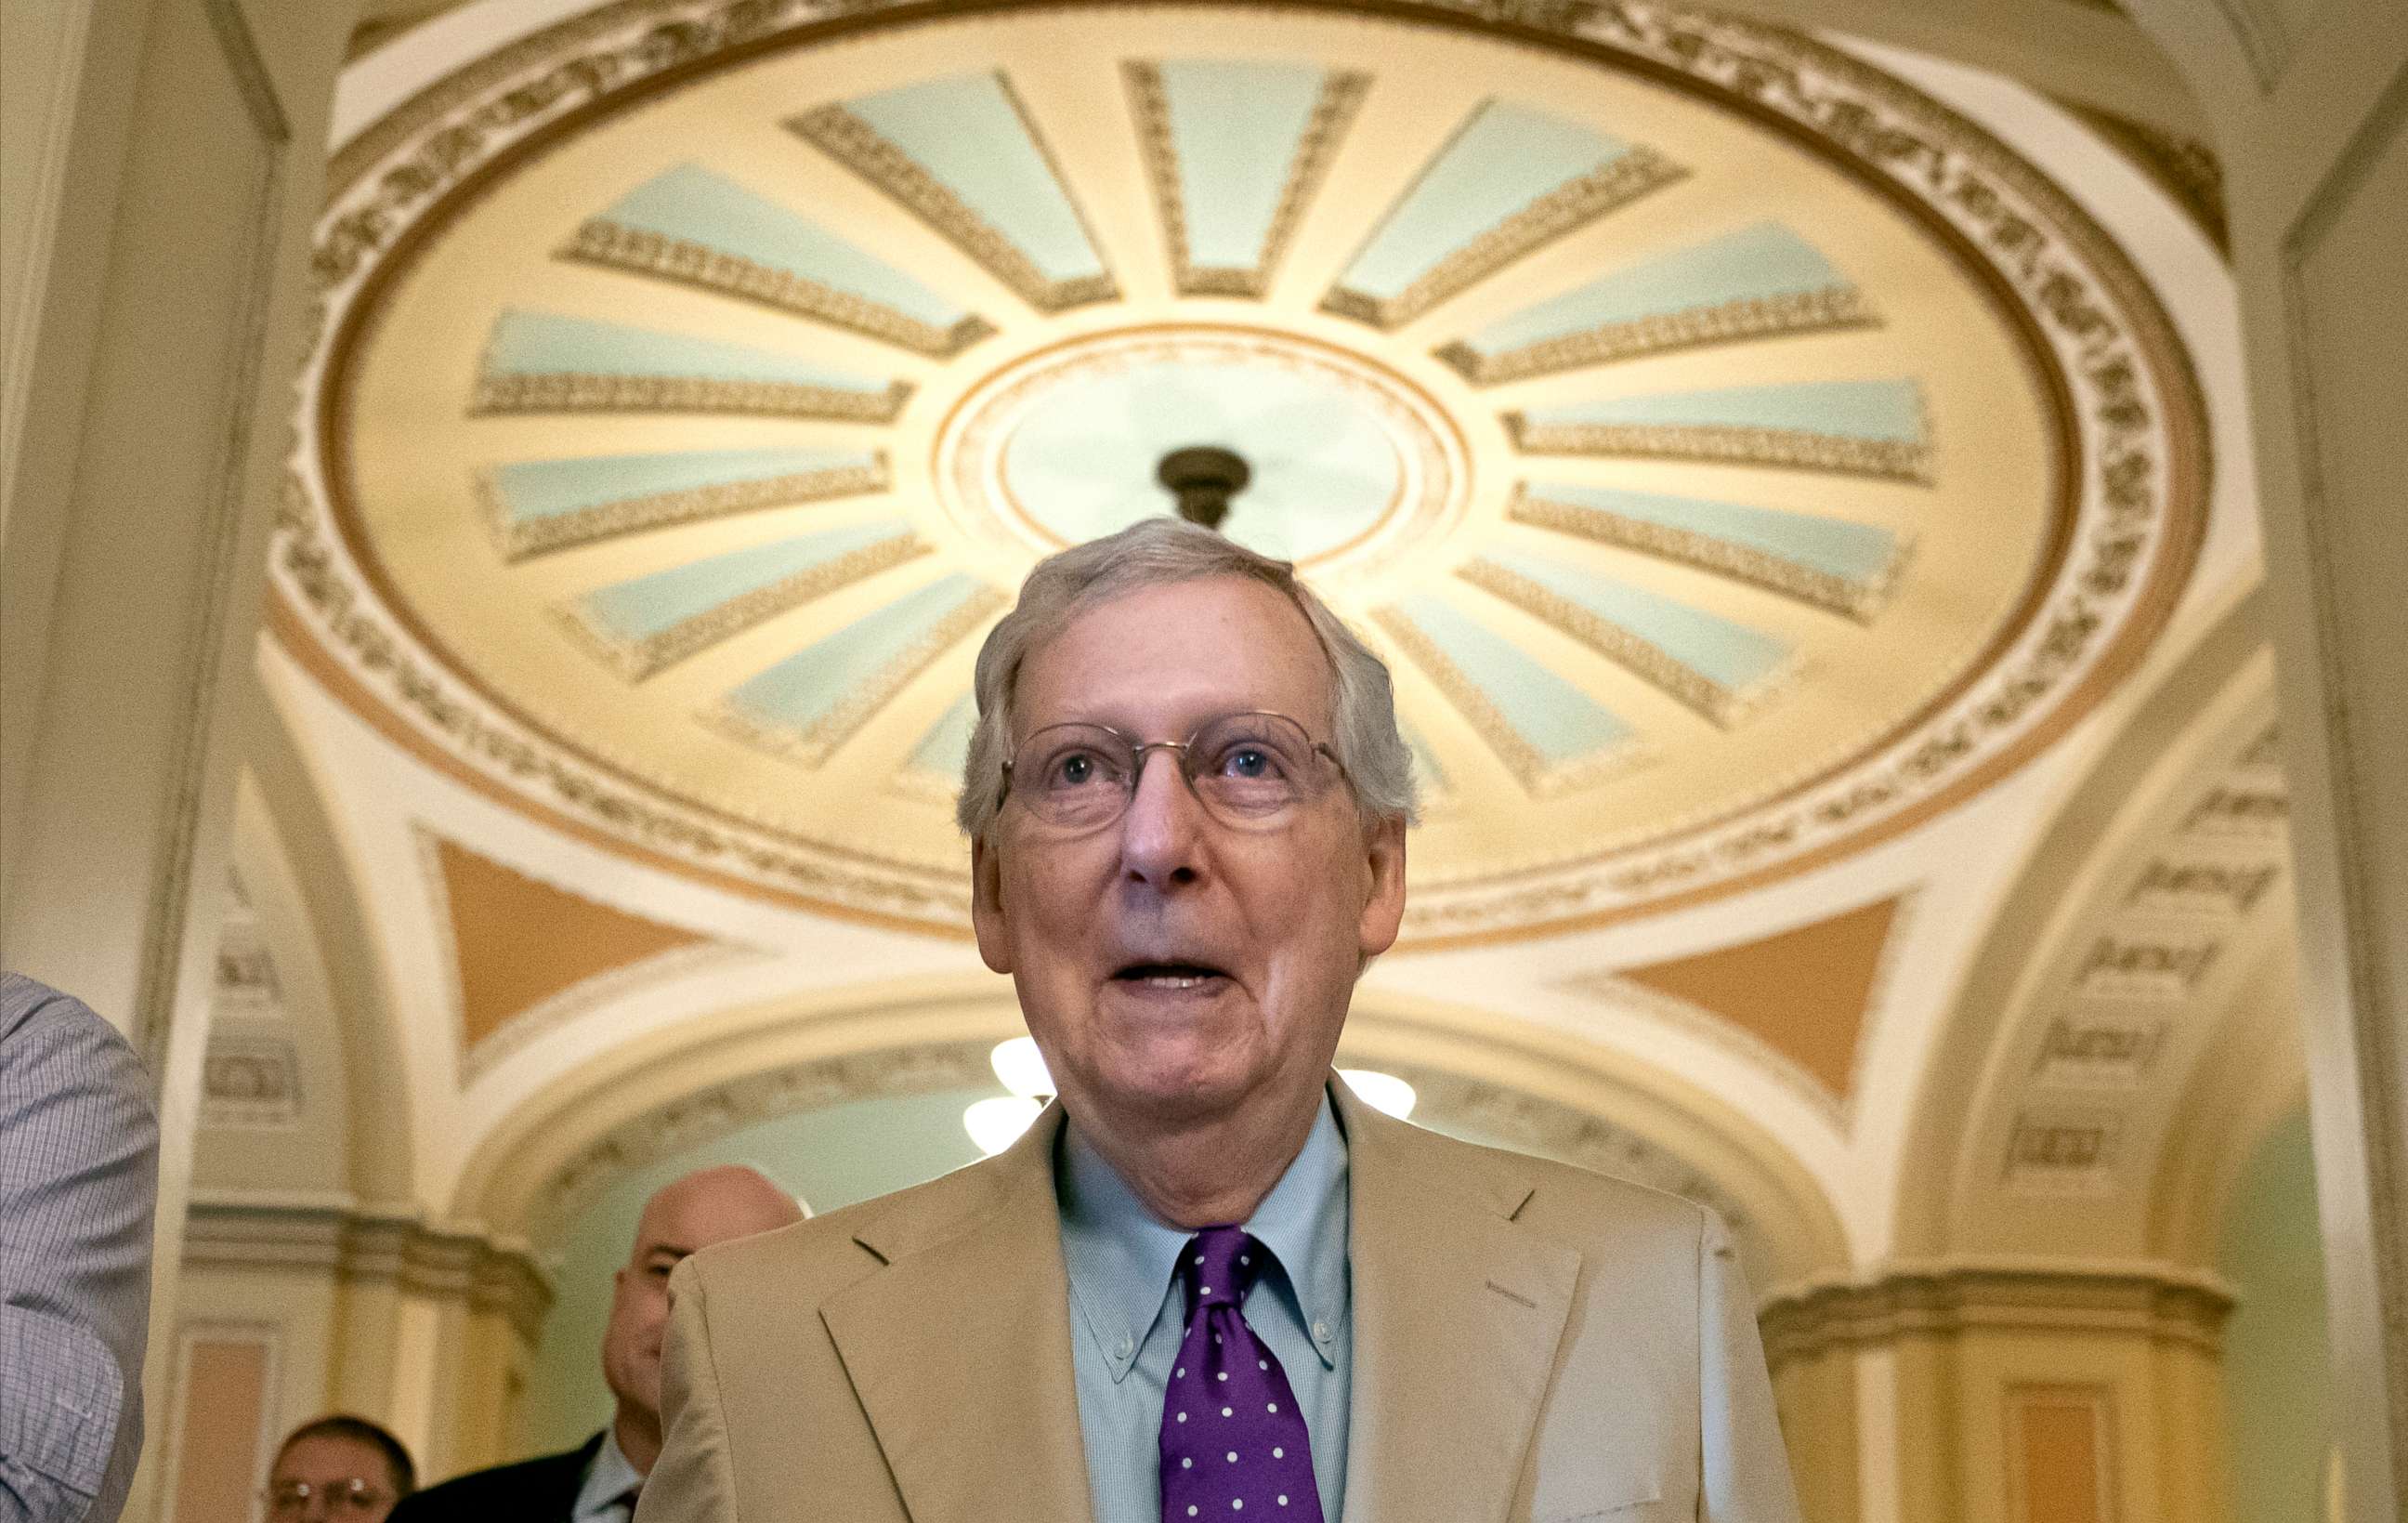 PHOTO: Senate Majority Leader Mitch McConnell walks to his office after speaking on the Senate floor at the Capitol in Washington, June 20, 2019.